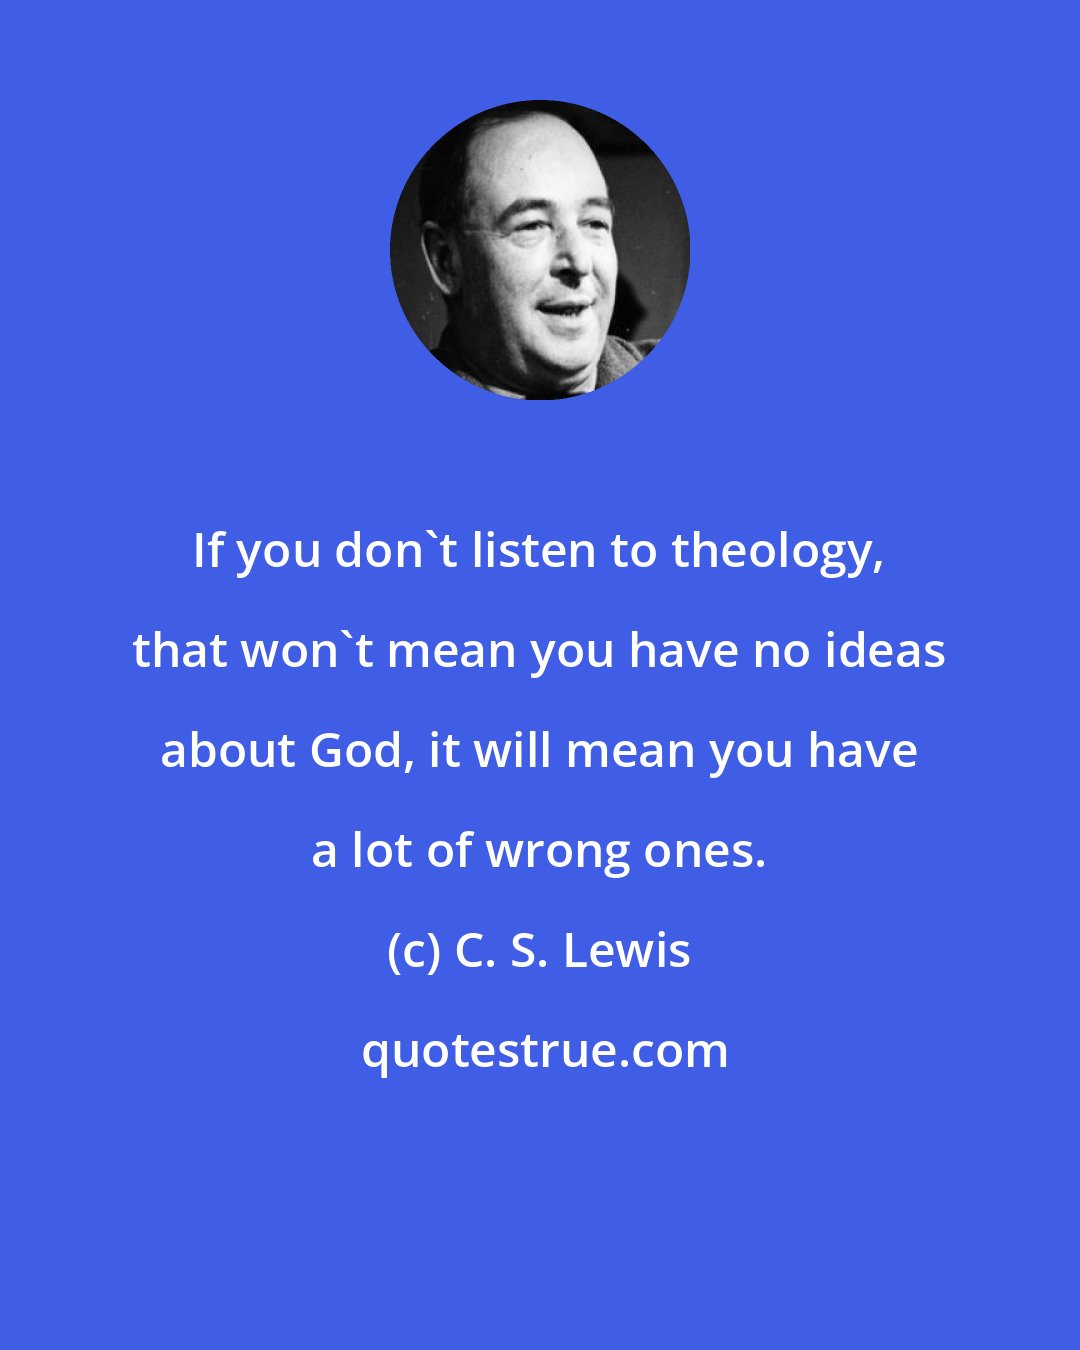 C. S. Lewis: If you don't listen to theology, that won't mean you have no ideas about God, it will mean you have a lot of wrong ones.